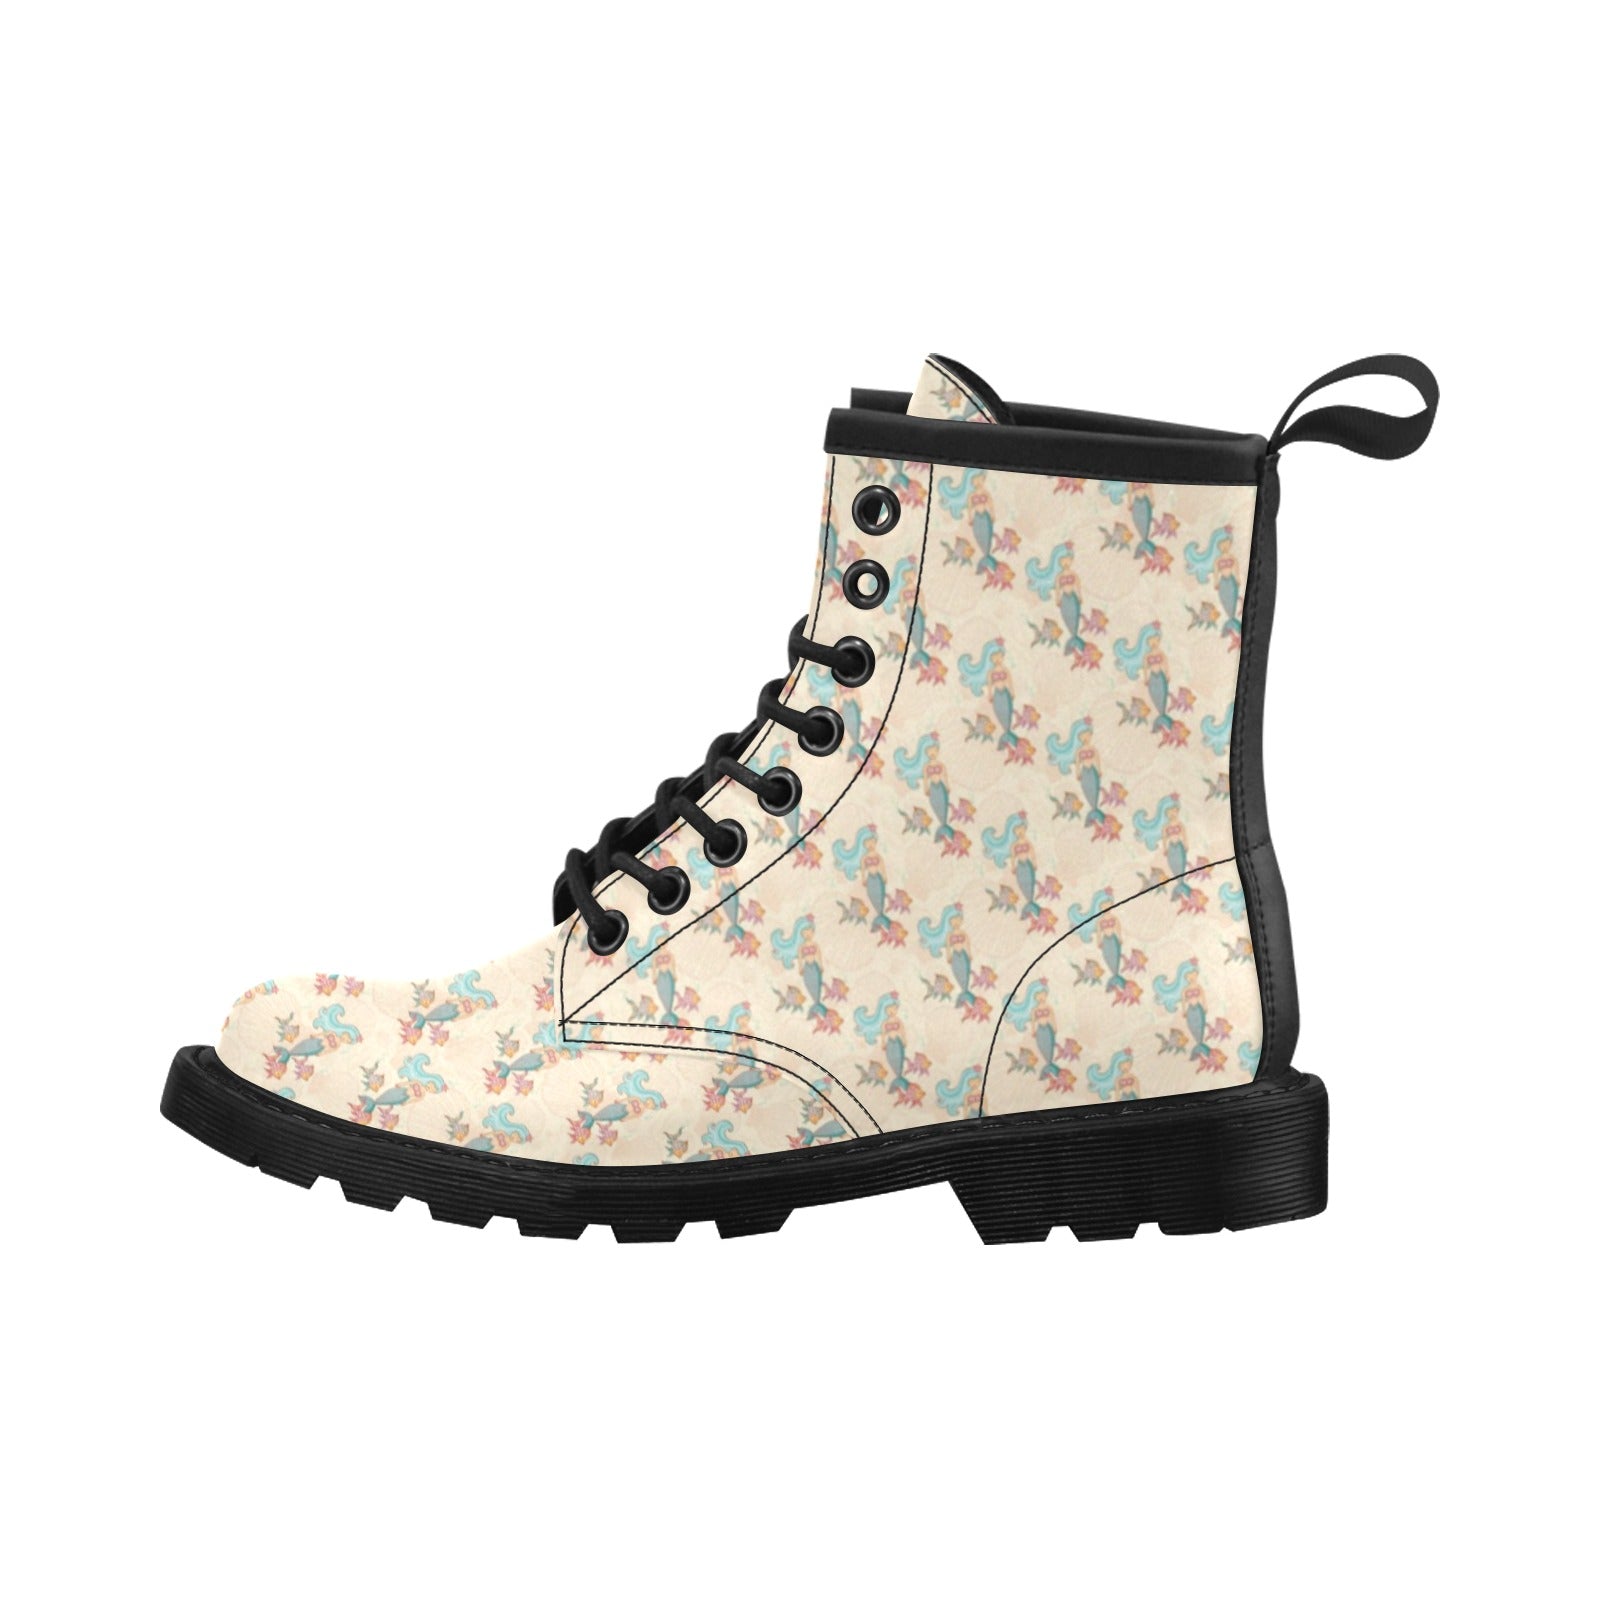 Mermaid Girl With Fish Design Print Women's Boots